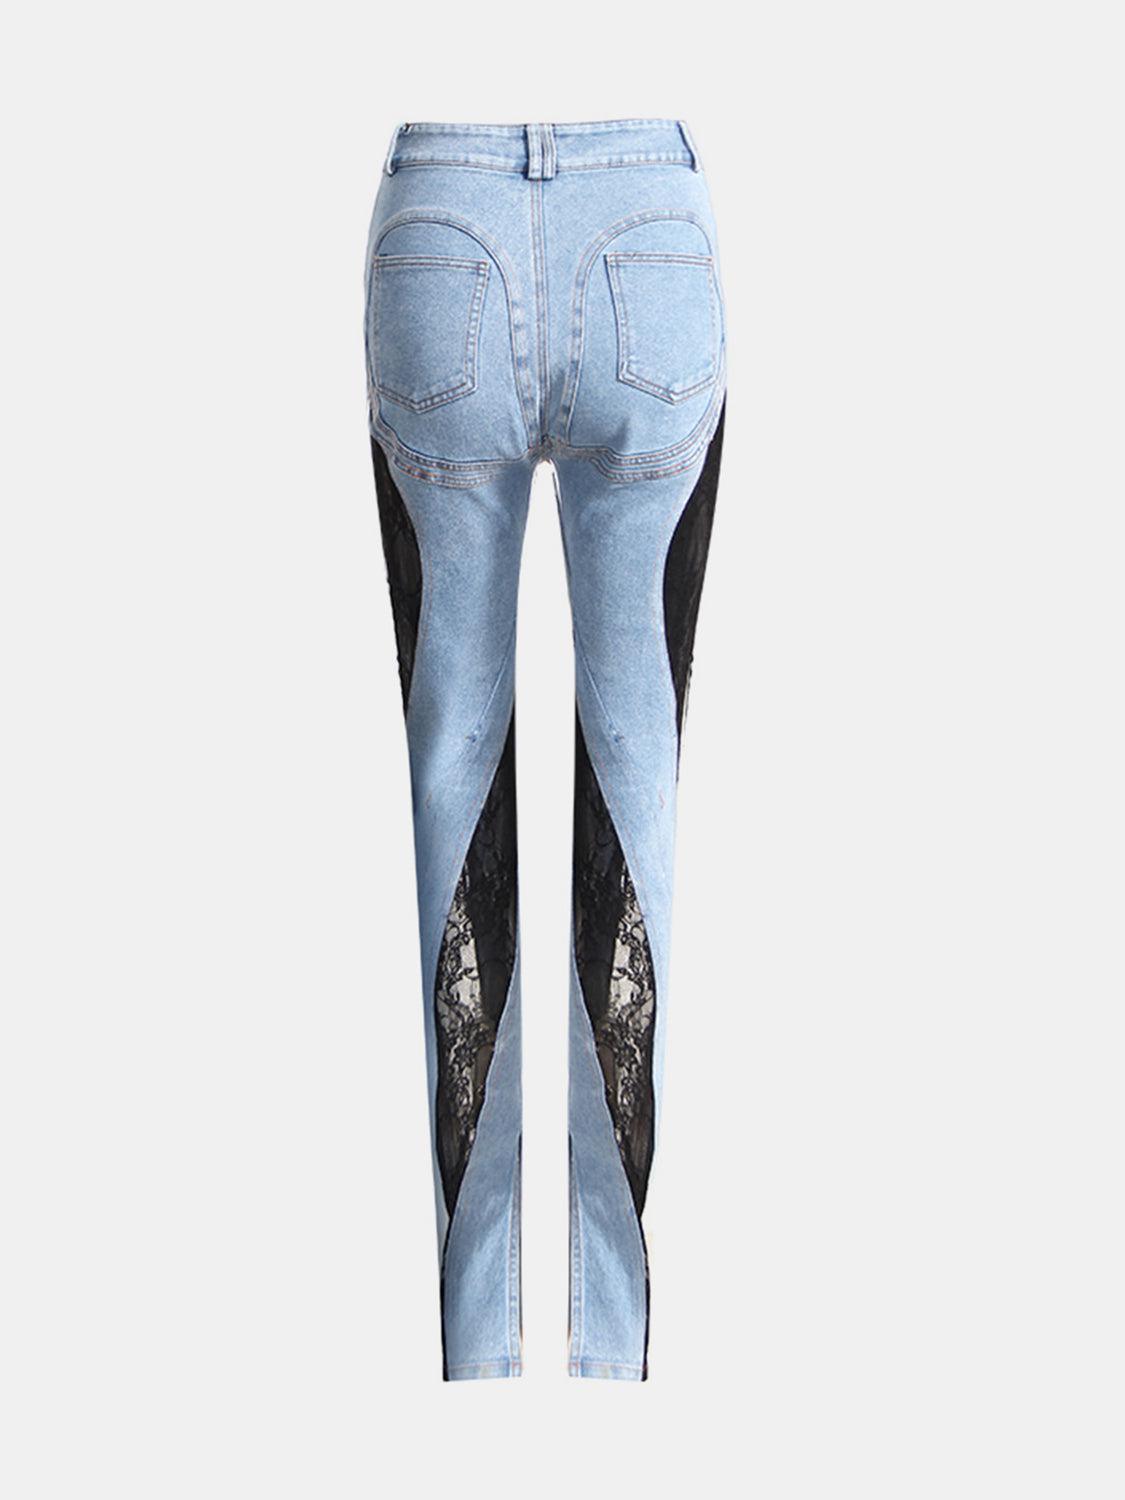 a pair of jeans with a patchwork design